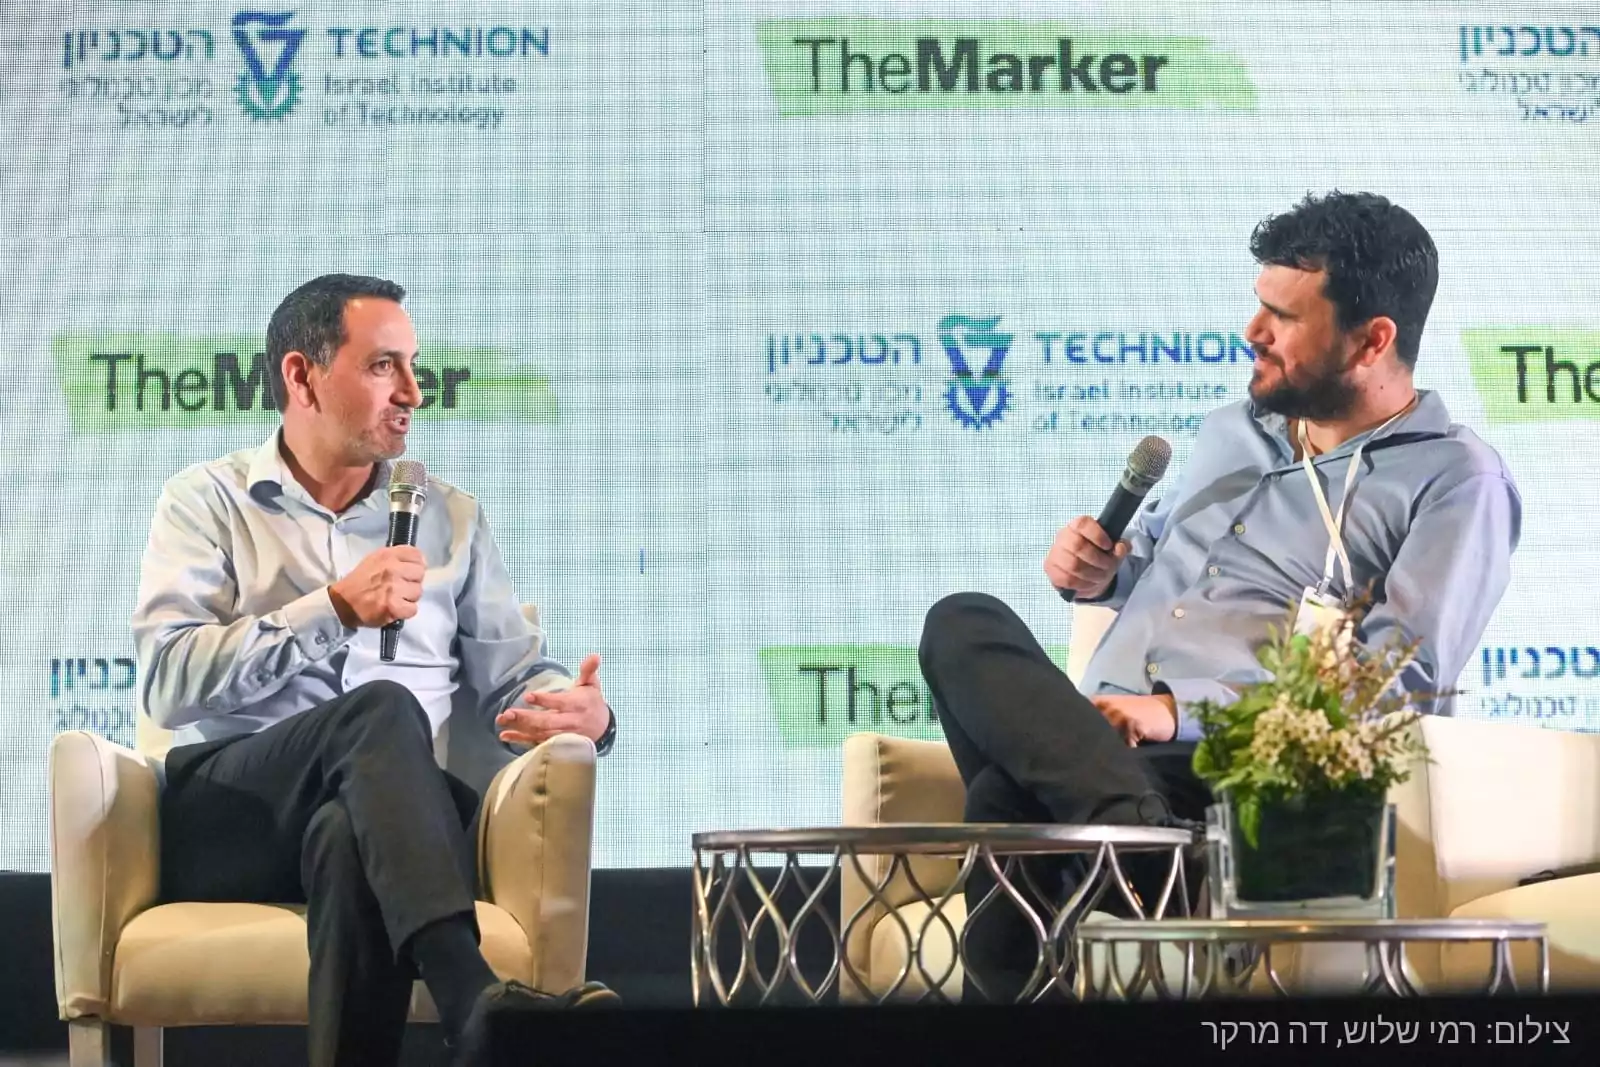 “I hope that in 2030 we won’t be sitting here discussing ‘How we lost Israeli high-tech'” (HE)